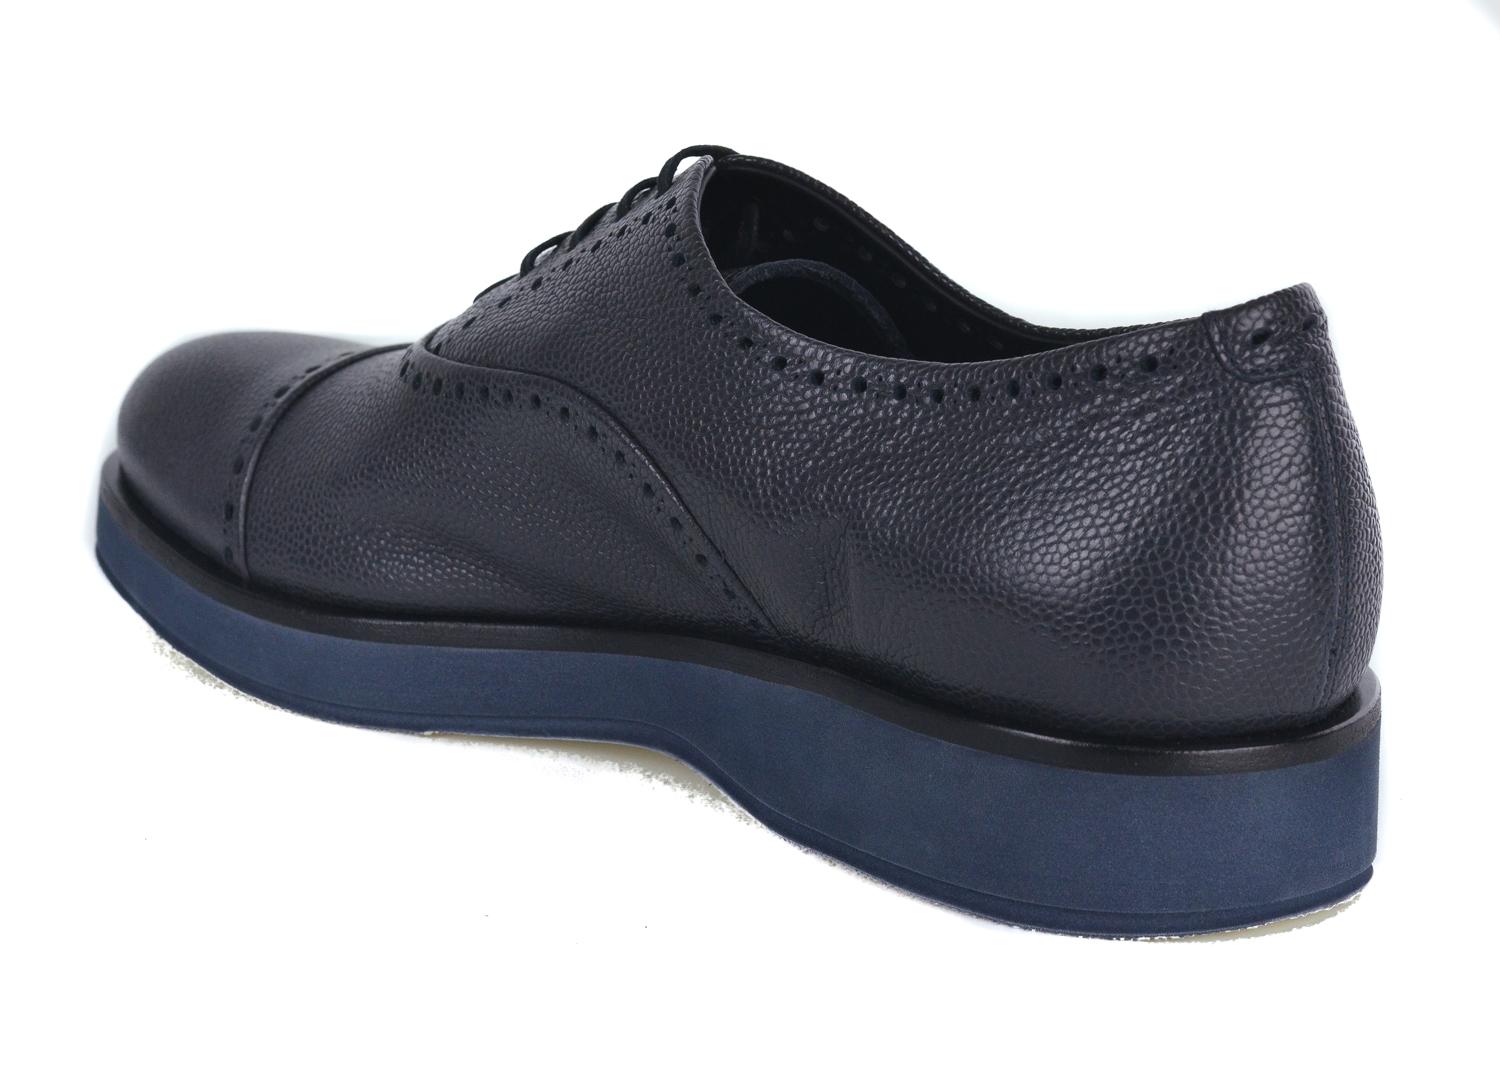 Giorgio Armani Mens Dark Grey Leather Perforated Oxfords Shoes In New Condition For Sale In Brooklyn, NY